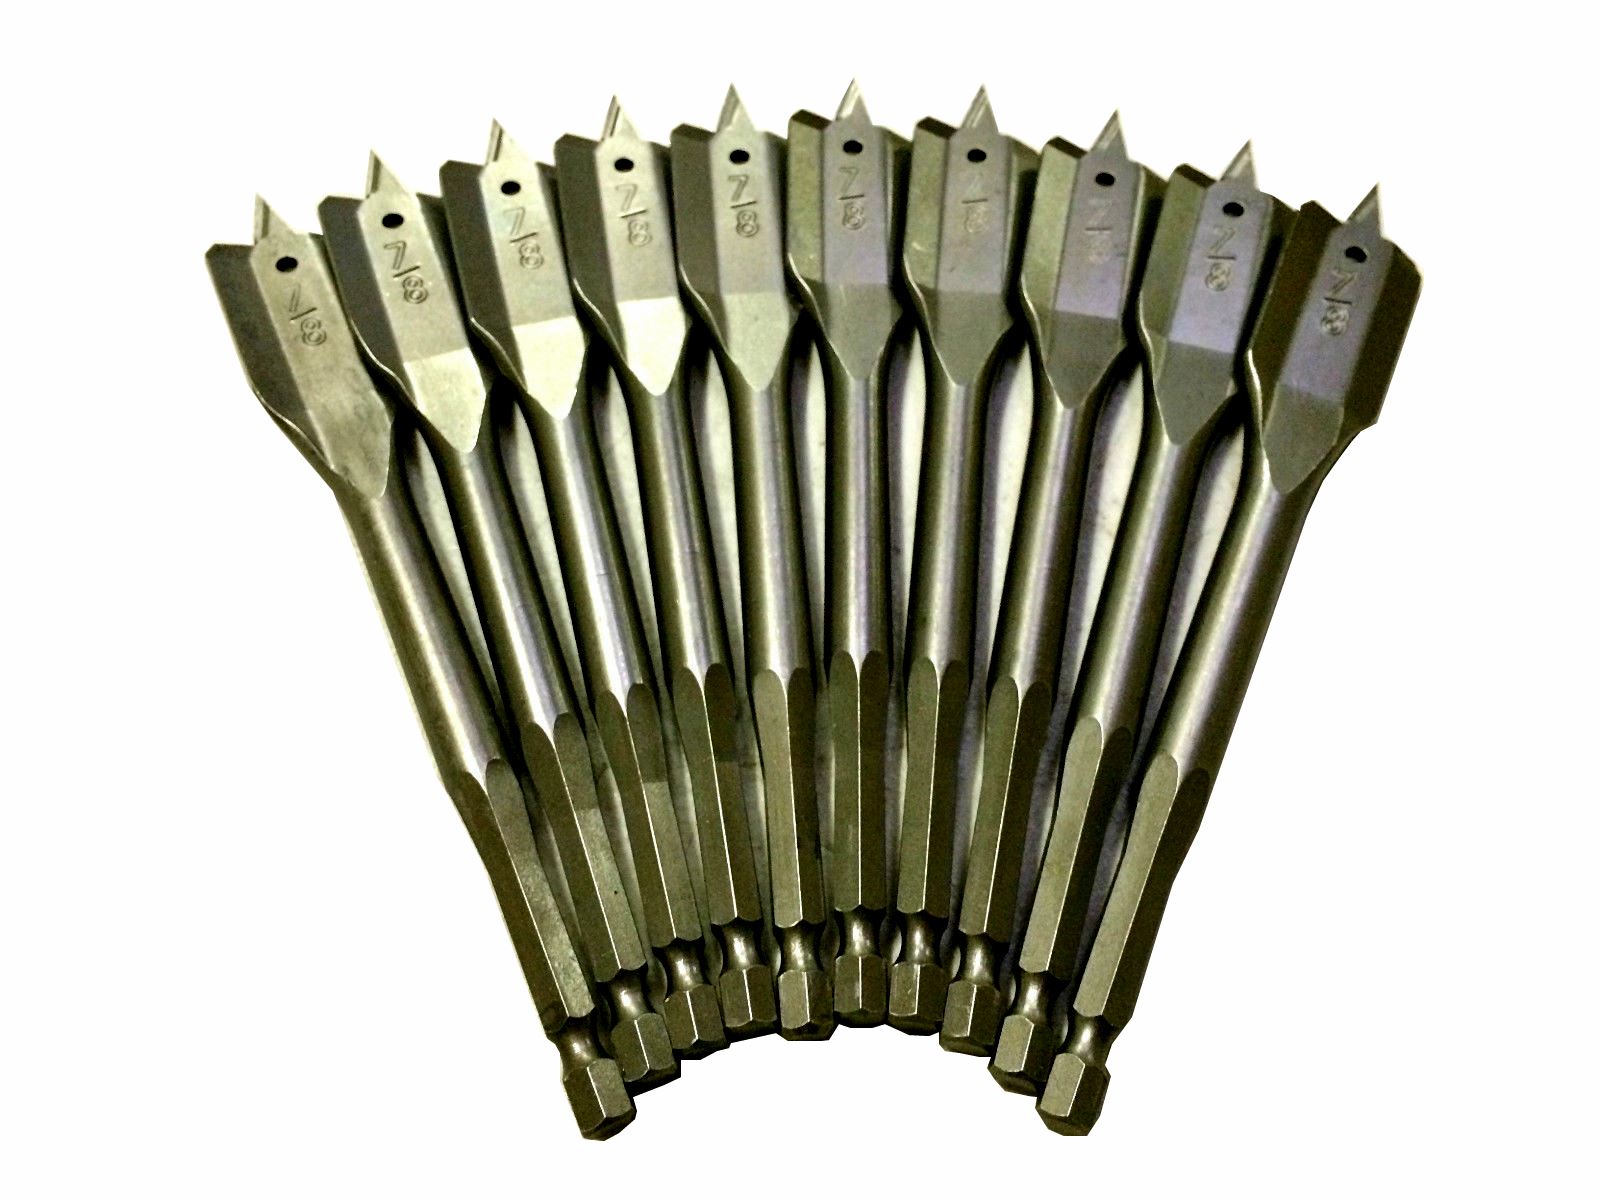 100 pc Wood Boring Bit Assortment 1/4" Hex Shank Sizes: 1/4" to 1 1/2" MADE IN THE U.S.A.